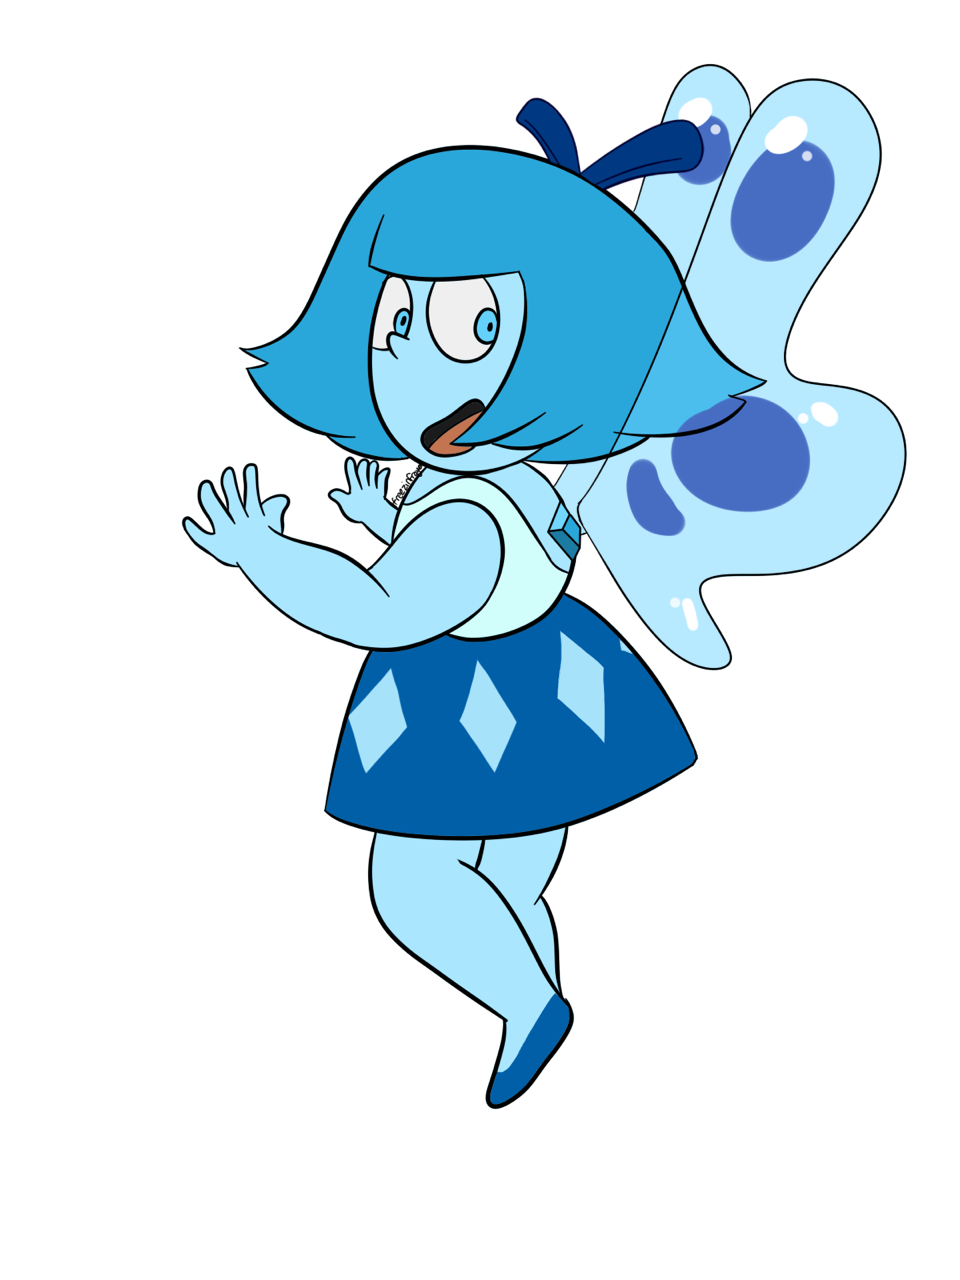 My interpretations of who those shadows were in the promo, aquamarine and topaz. And before anyone says anything, it was leaked to be aquamarine and topaz.